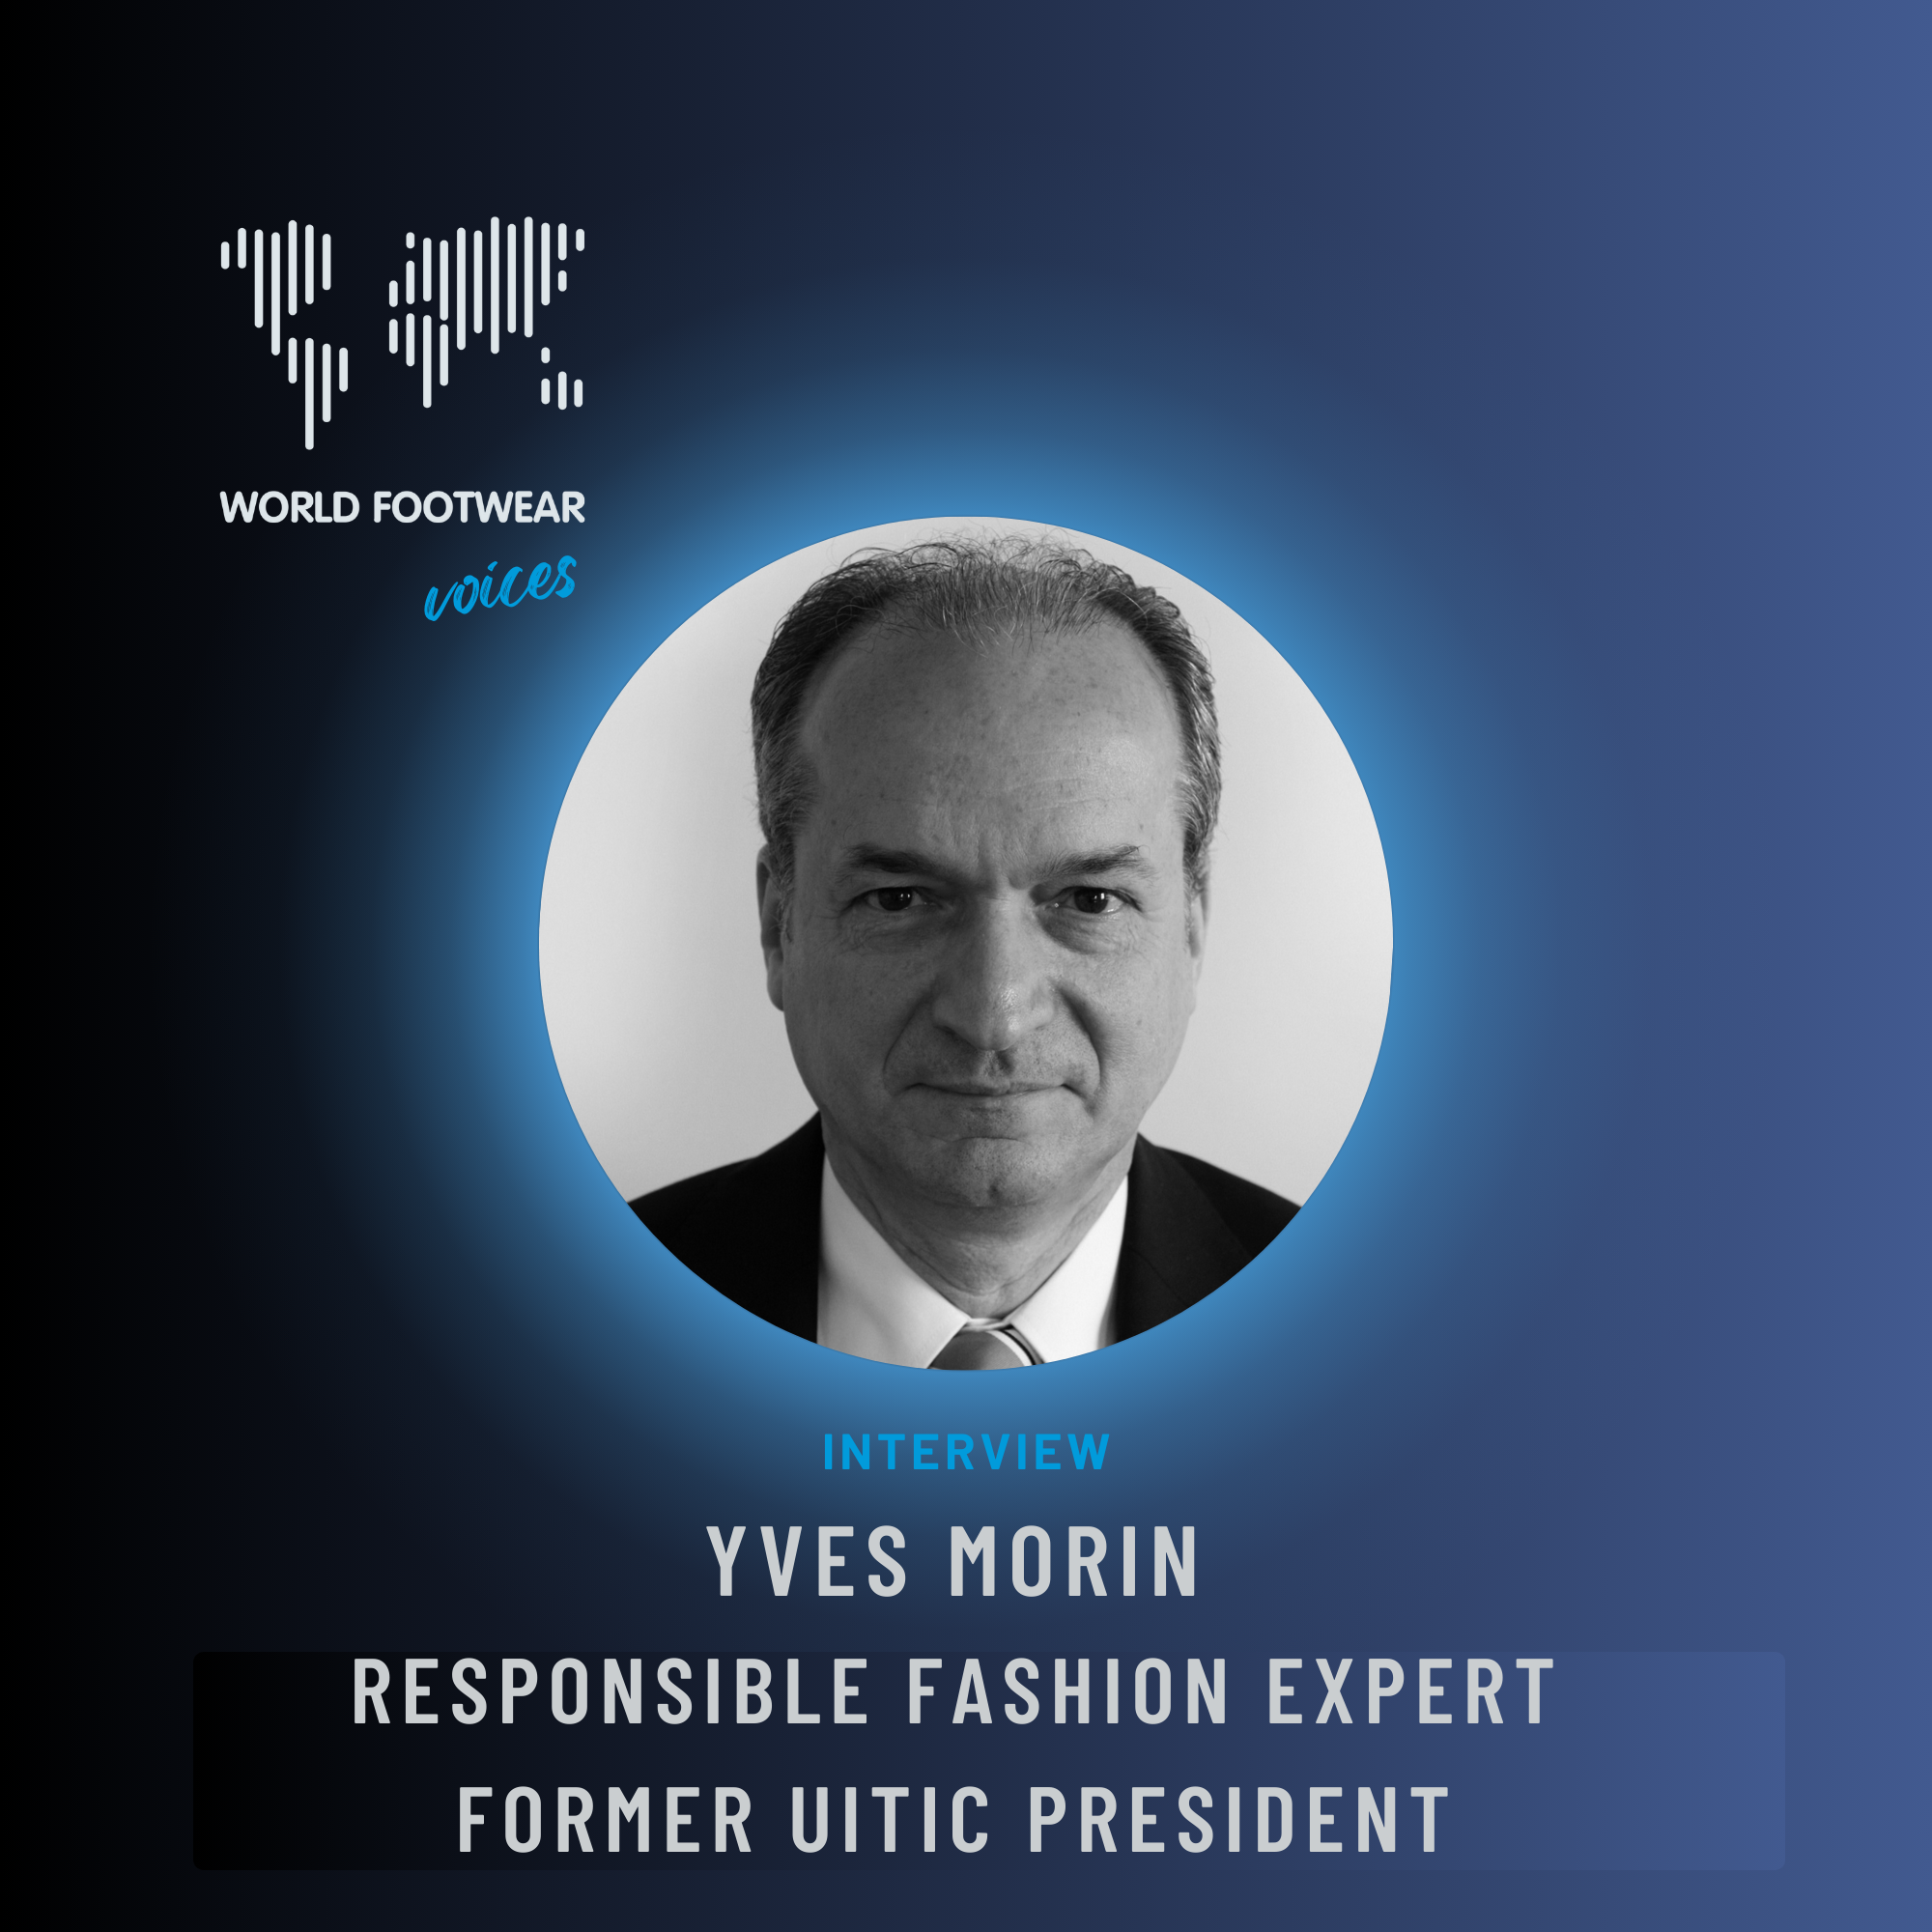 World Footwear Voices: interview with Yves Morin